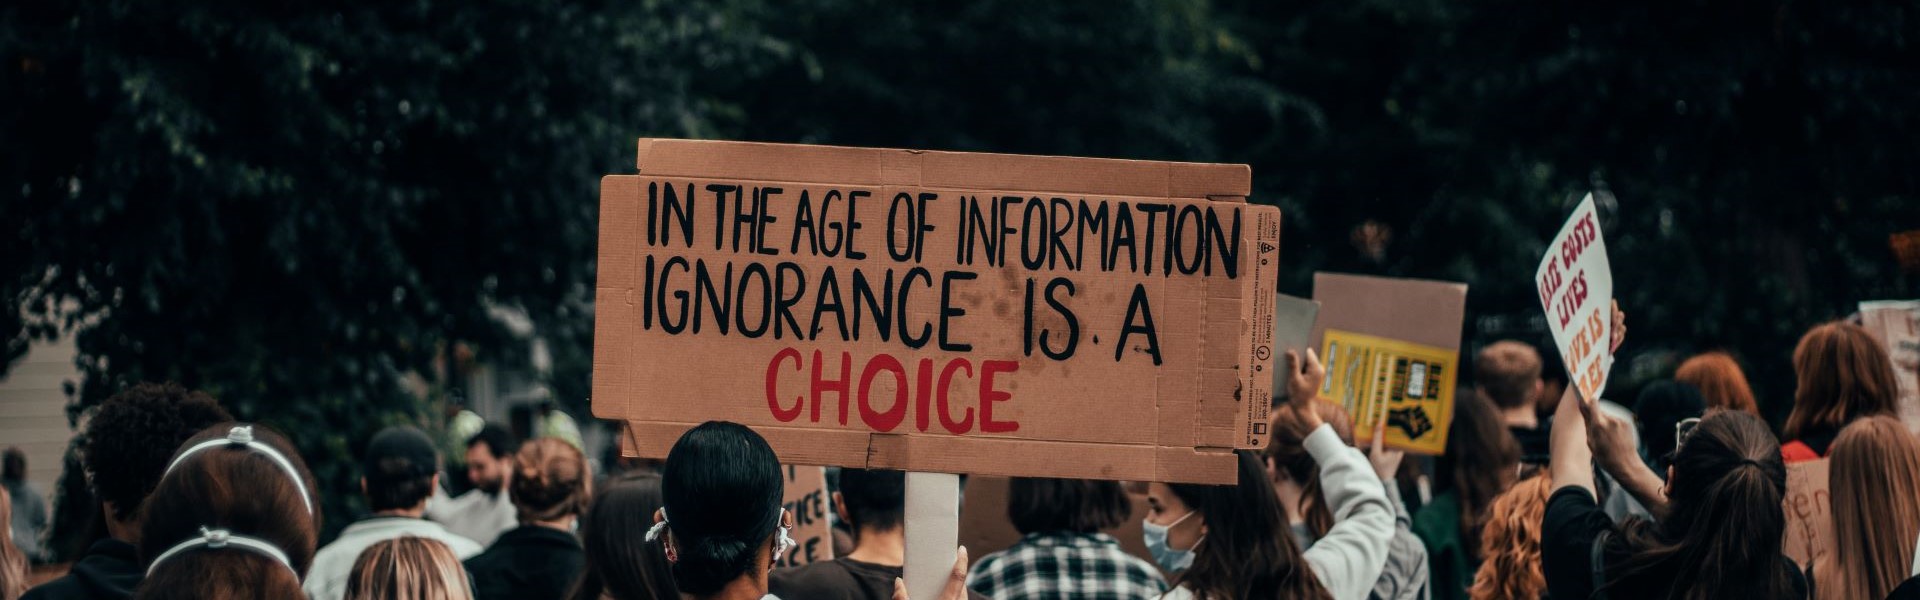 Crowd with a sign ignorance in information age is a choice